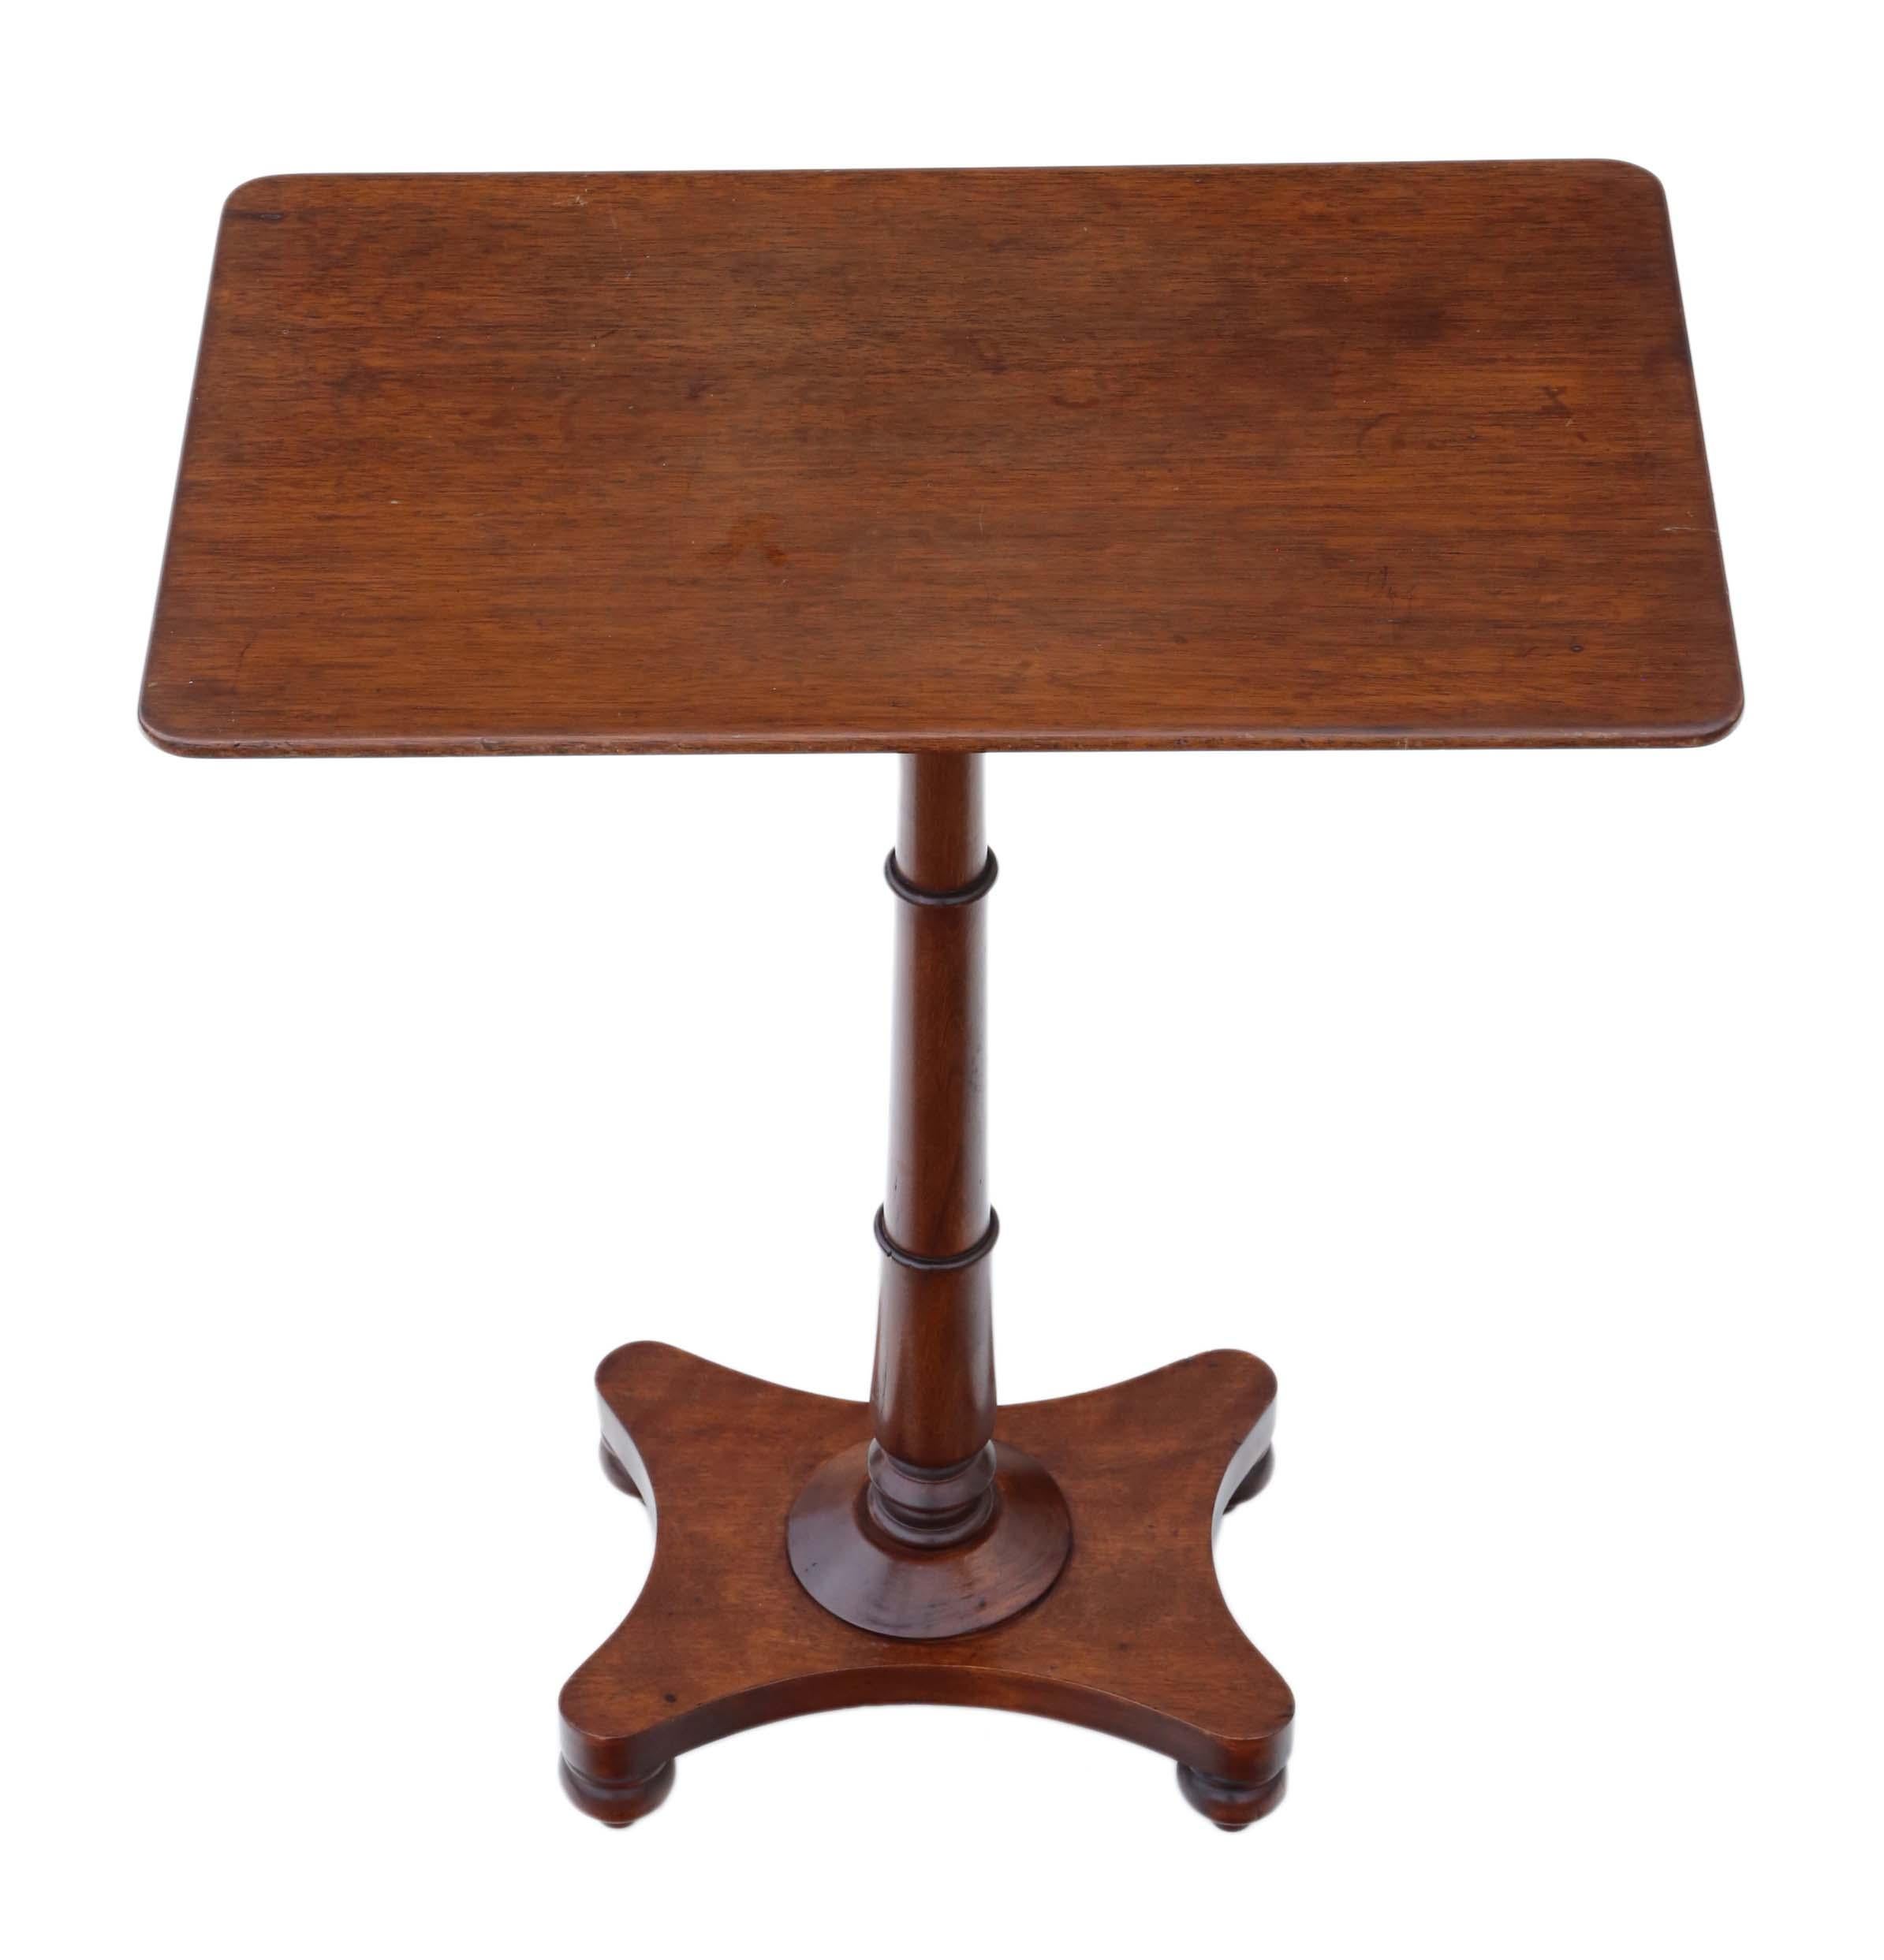 Antique fine quality William IV / Victorian mahogany wine, side or occasional table circa 1830-1850.
Solid with no loose joints. Full of age, character and charm.
Would look great in the right location!
Overall maximum dimensions: 61cm W x 38cm D